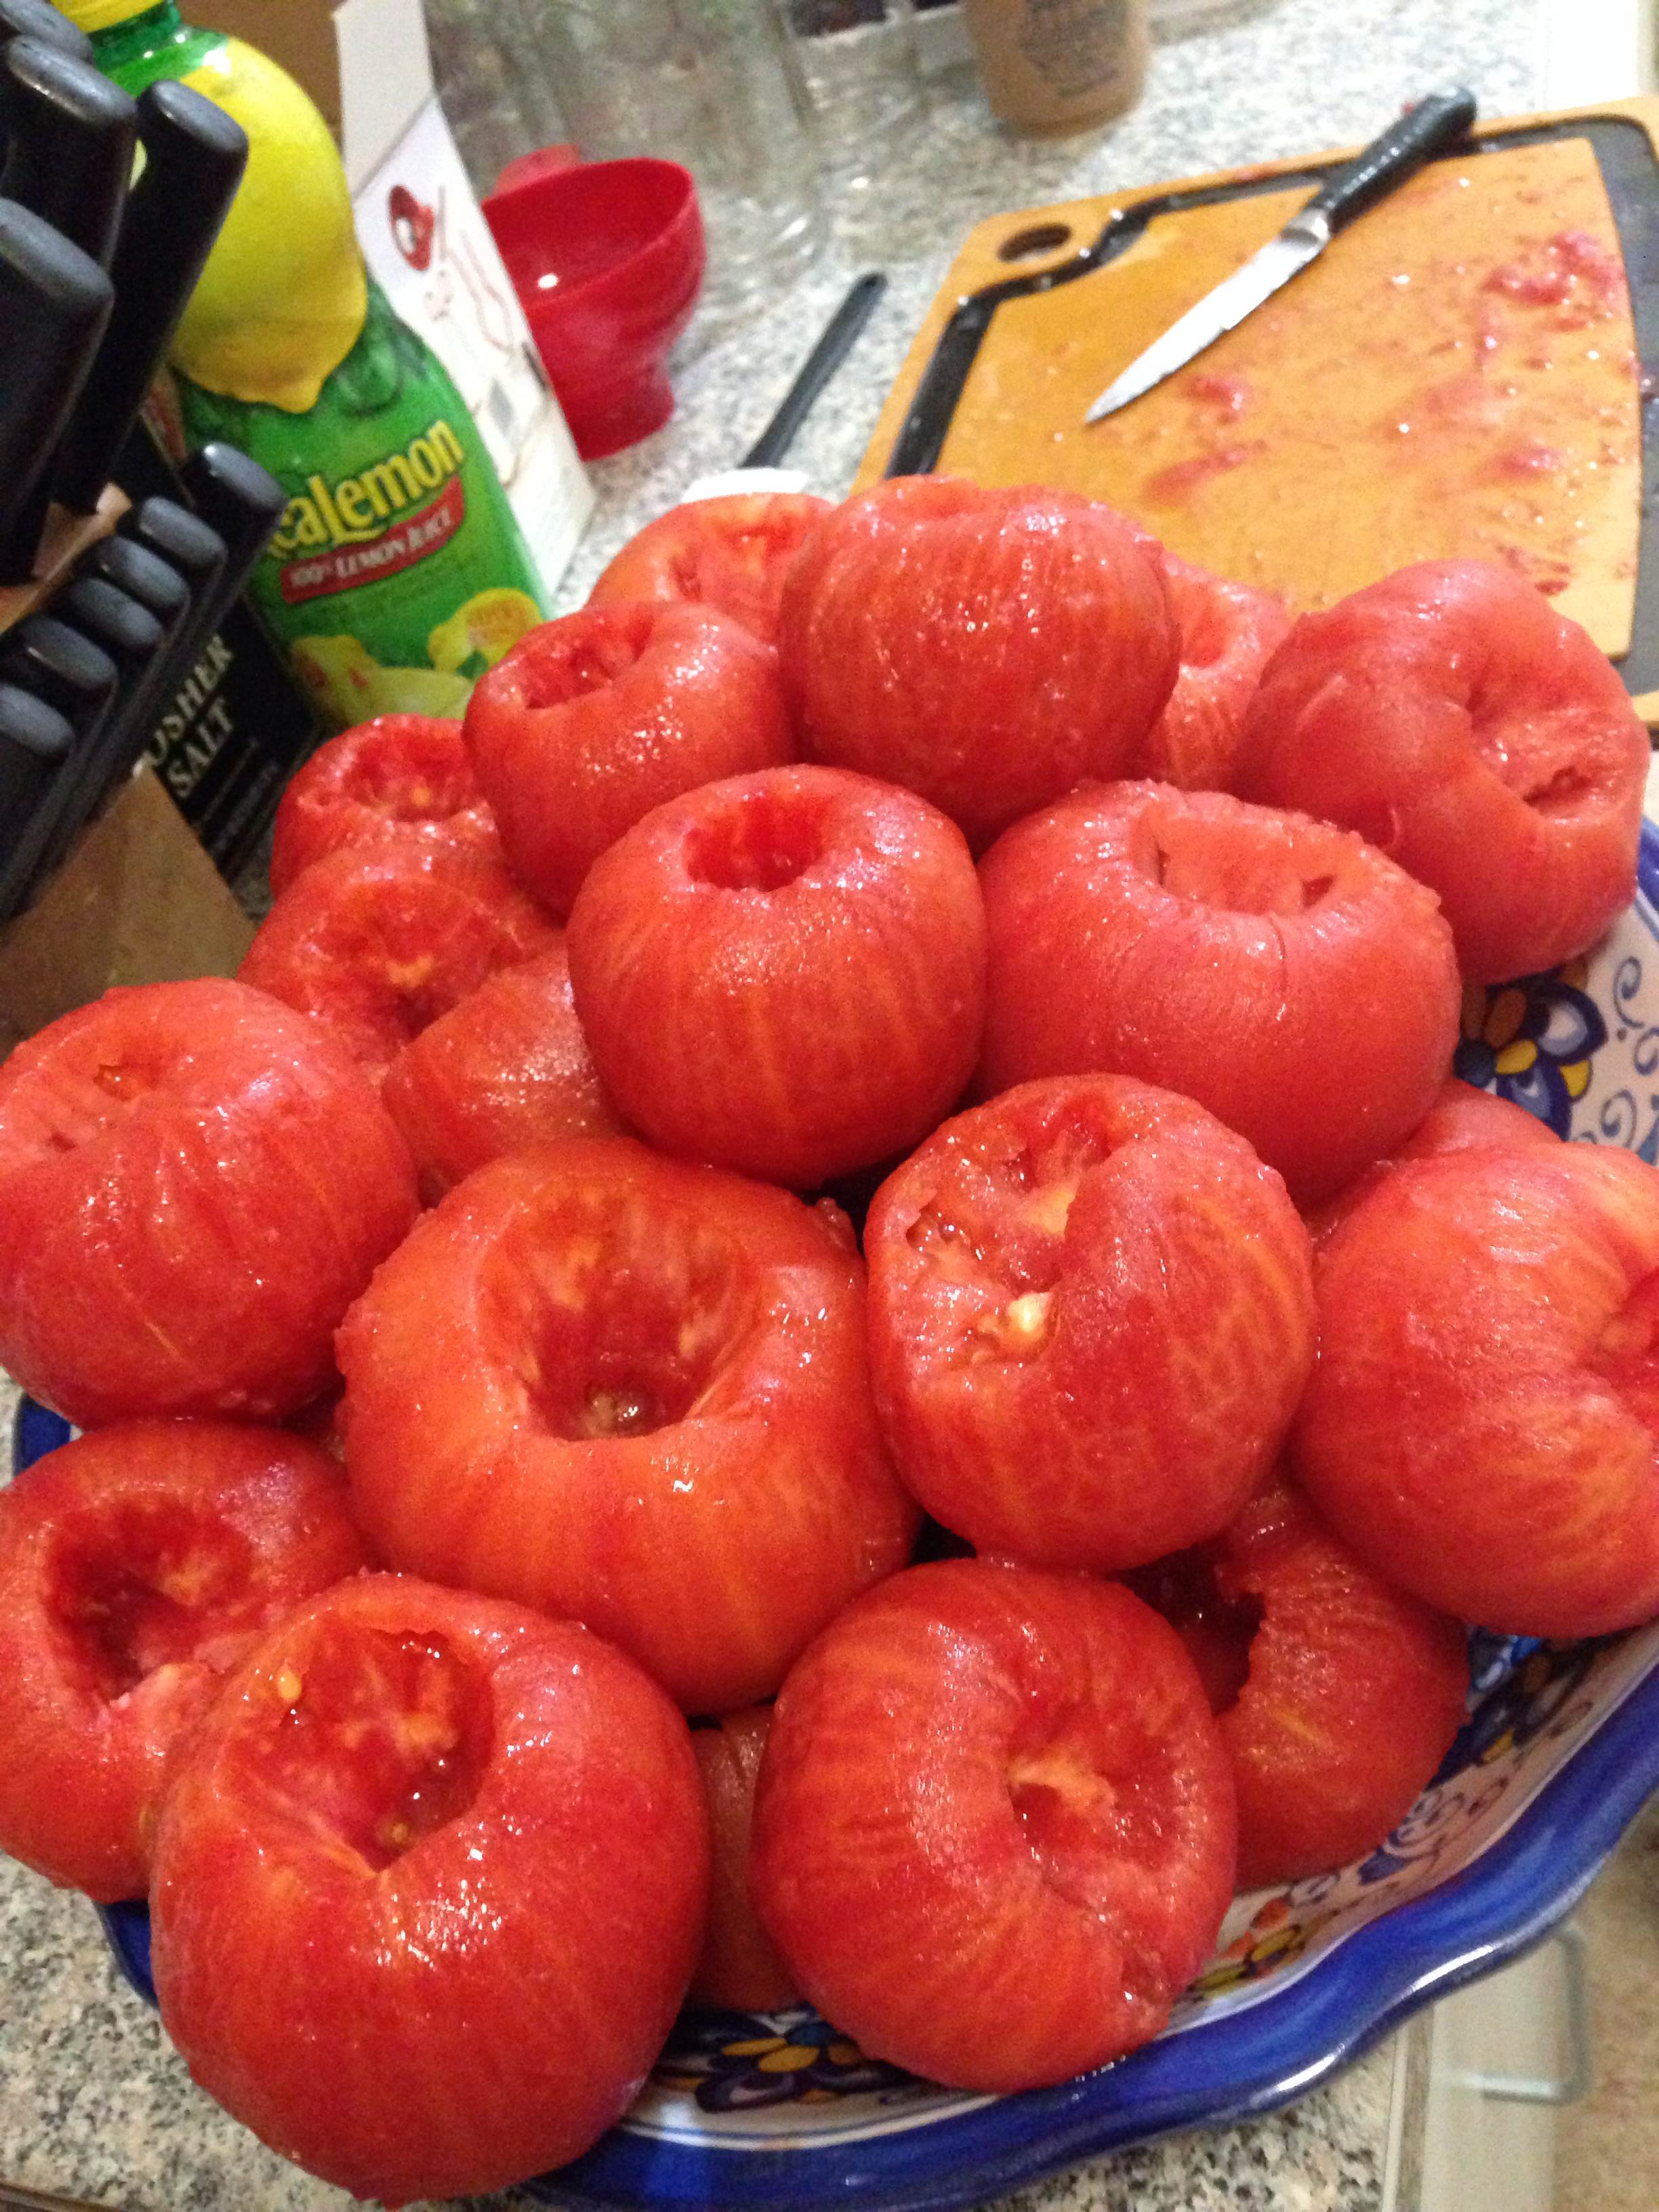 Before canning, you have to boil the tomatoes for a few minutes, called blanching, to peel the skin off. They also have to be cored.